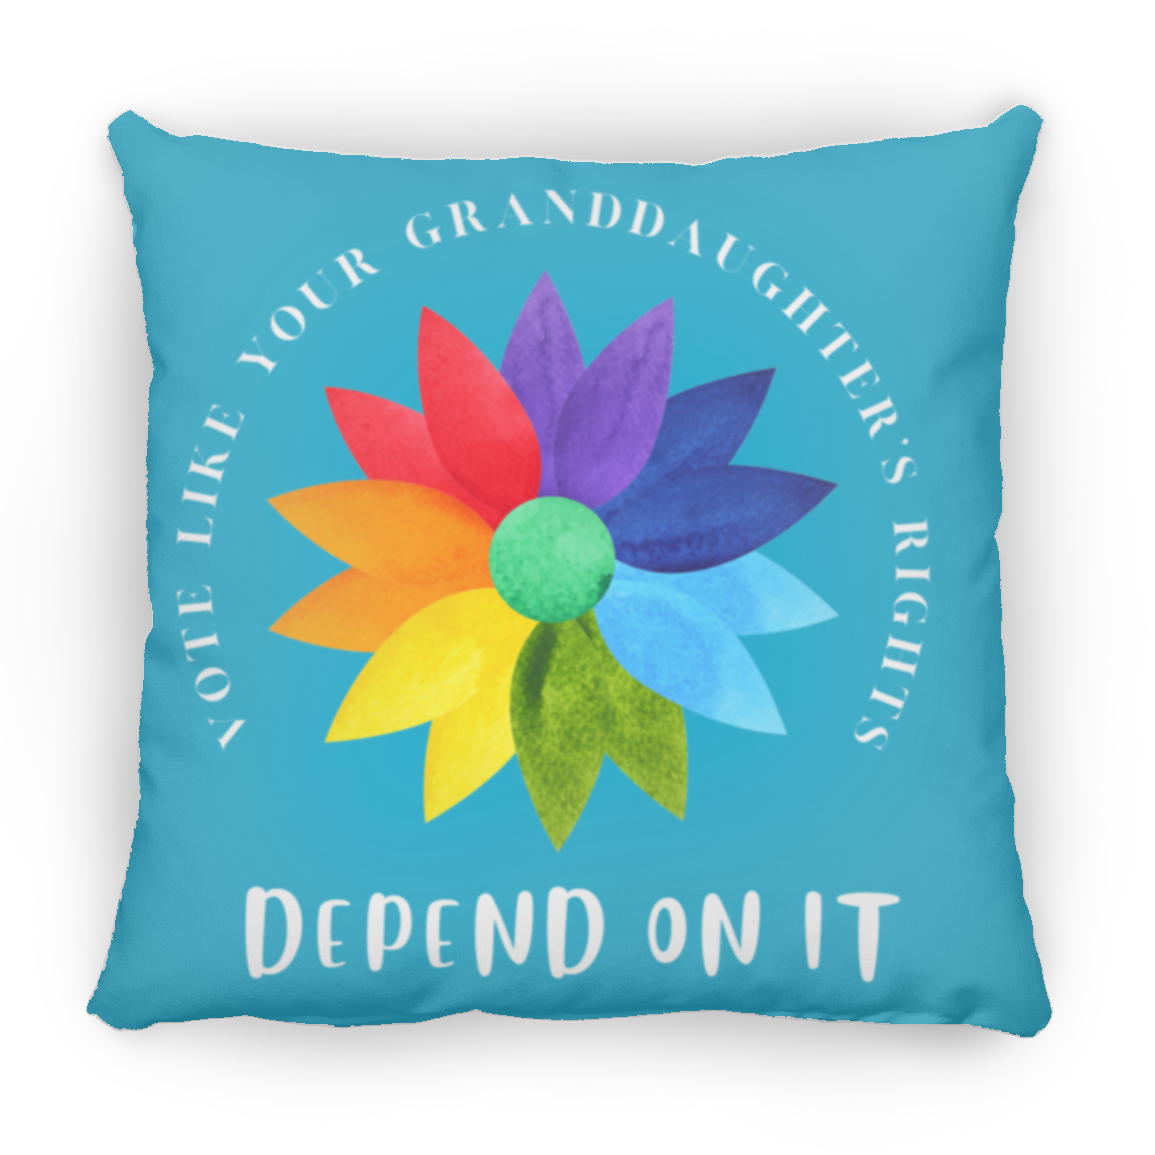 VOTE like your granddaughter’s rights DEPEND ON IT Square Pillow